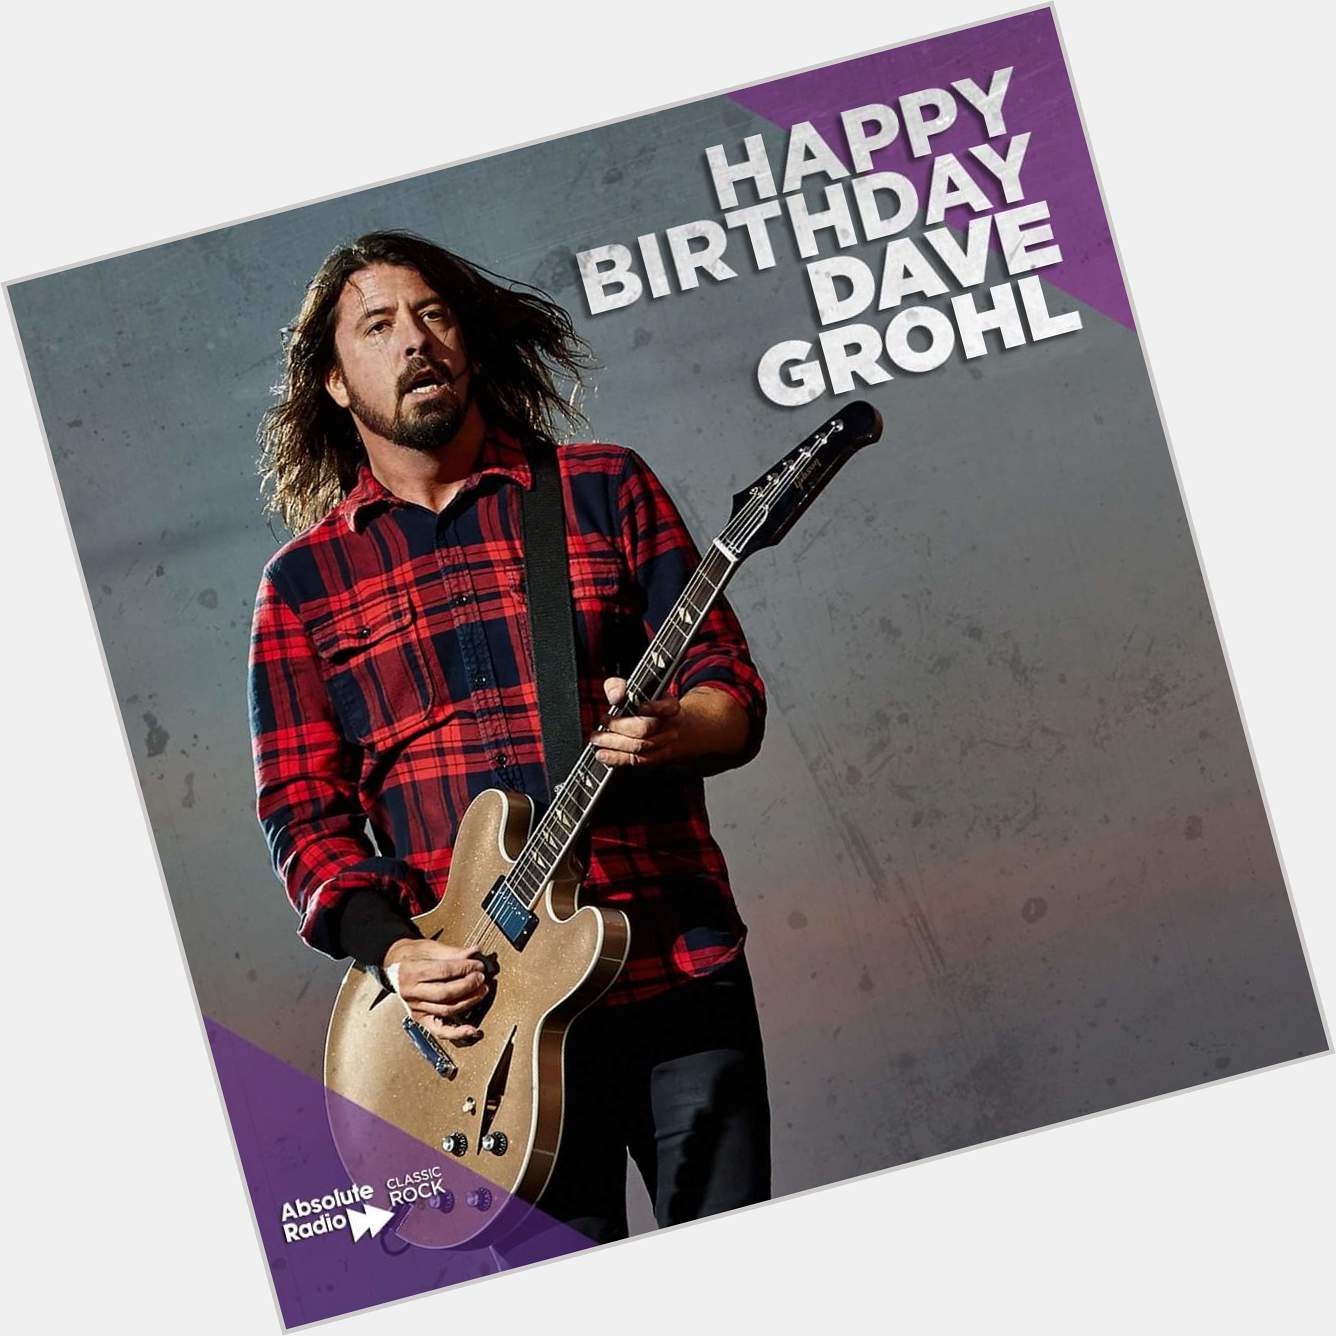 Happy birthday to the nicest man in rock, Nirvana drummer and Foo Fighters frontman, Dave Grohl! 